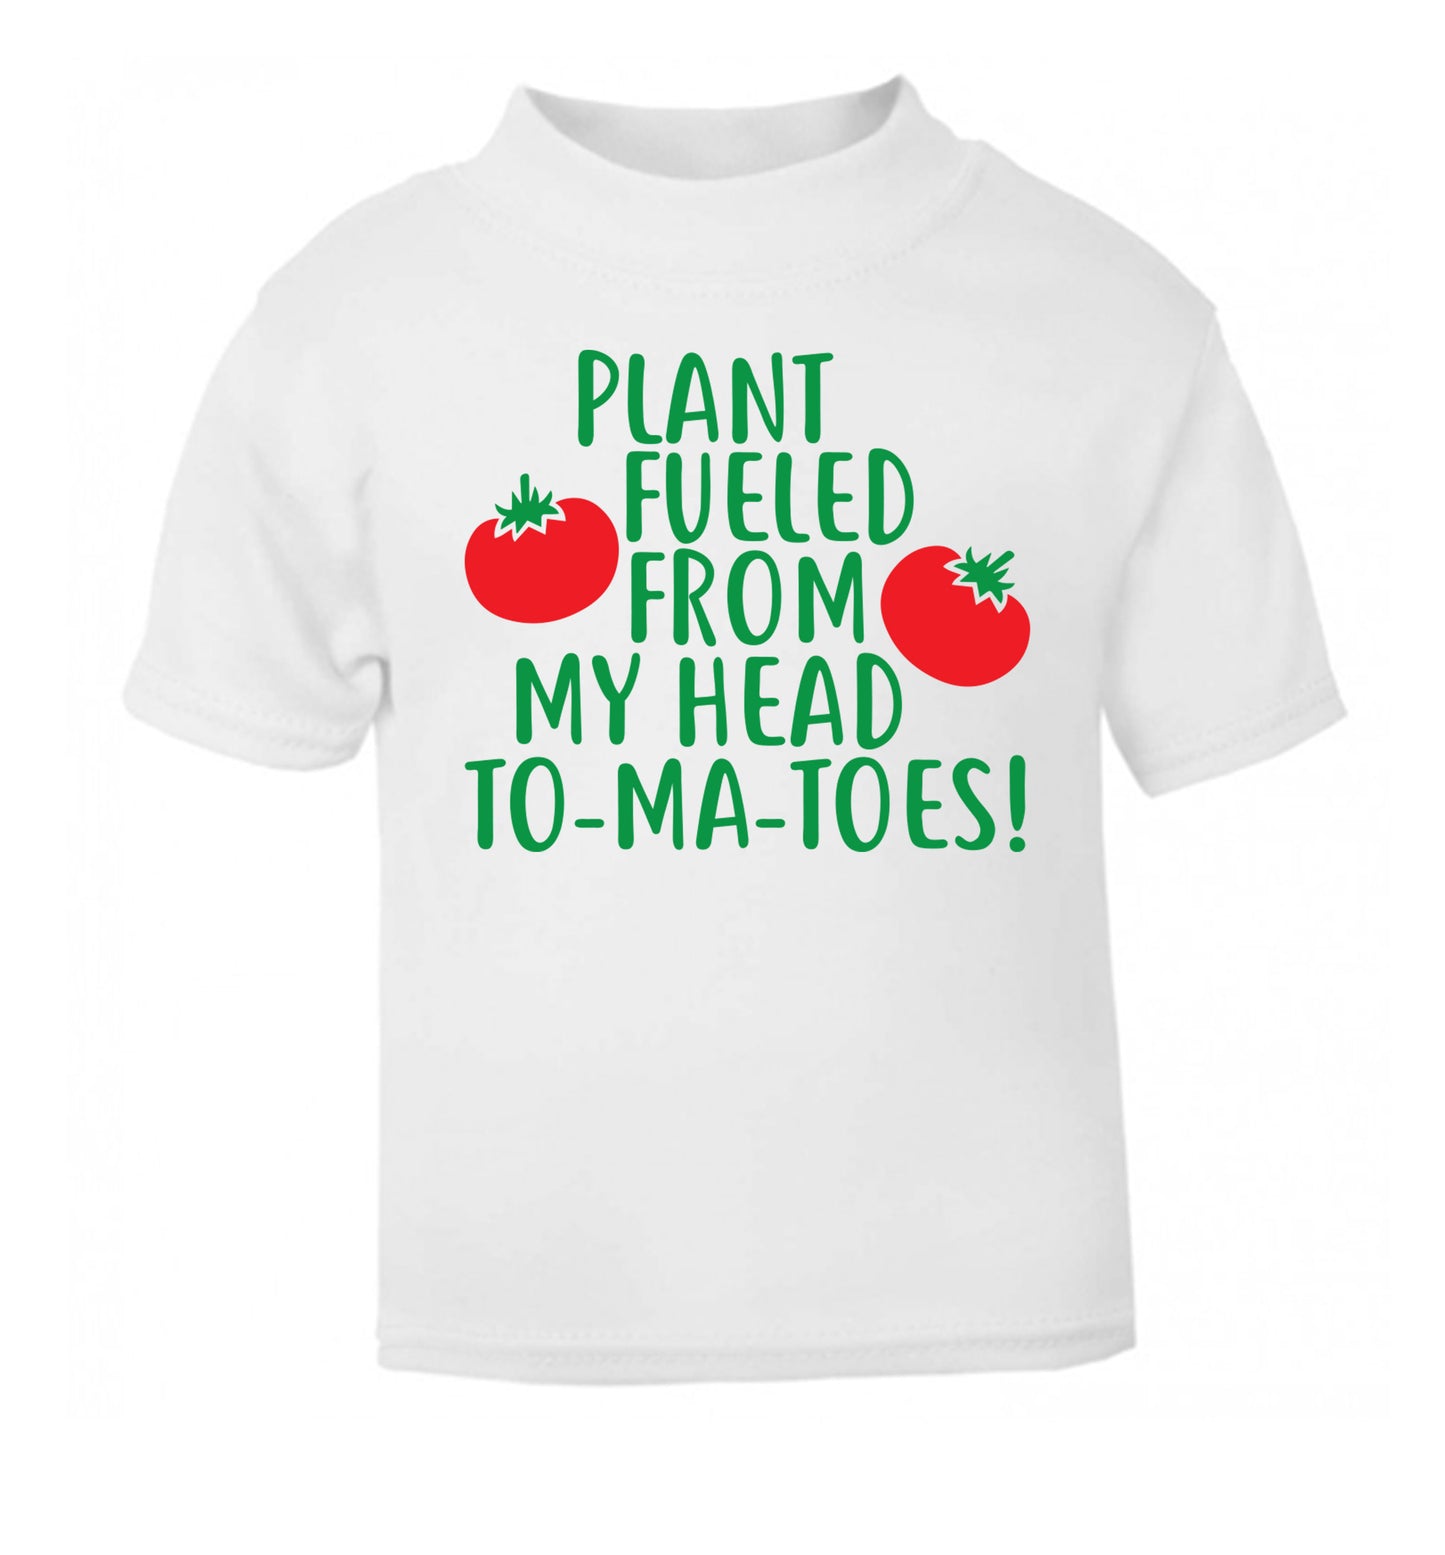 Plant fueled from my head to-ma-toes white Baby Toddler Tshirt 2 Years